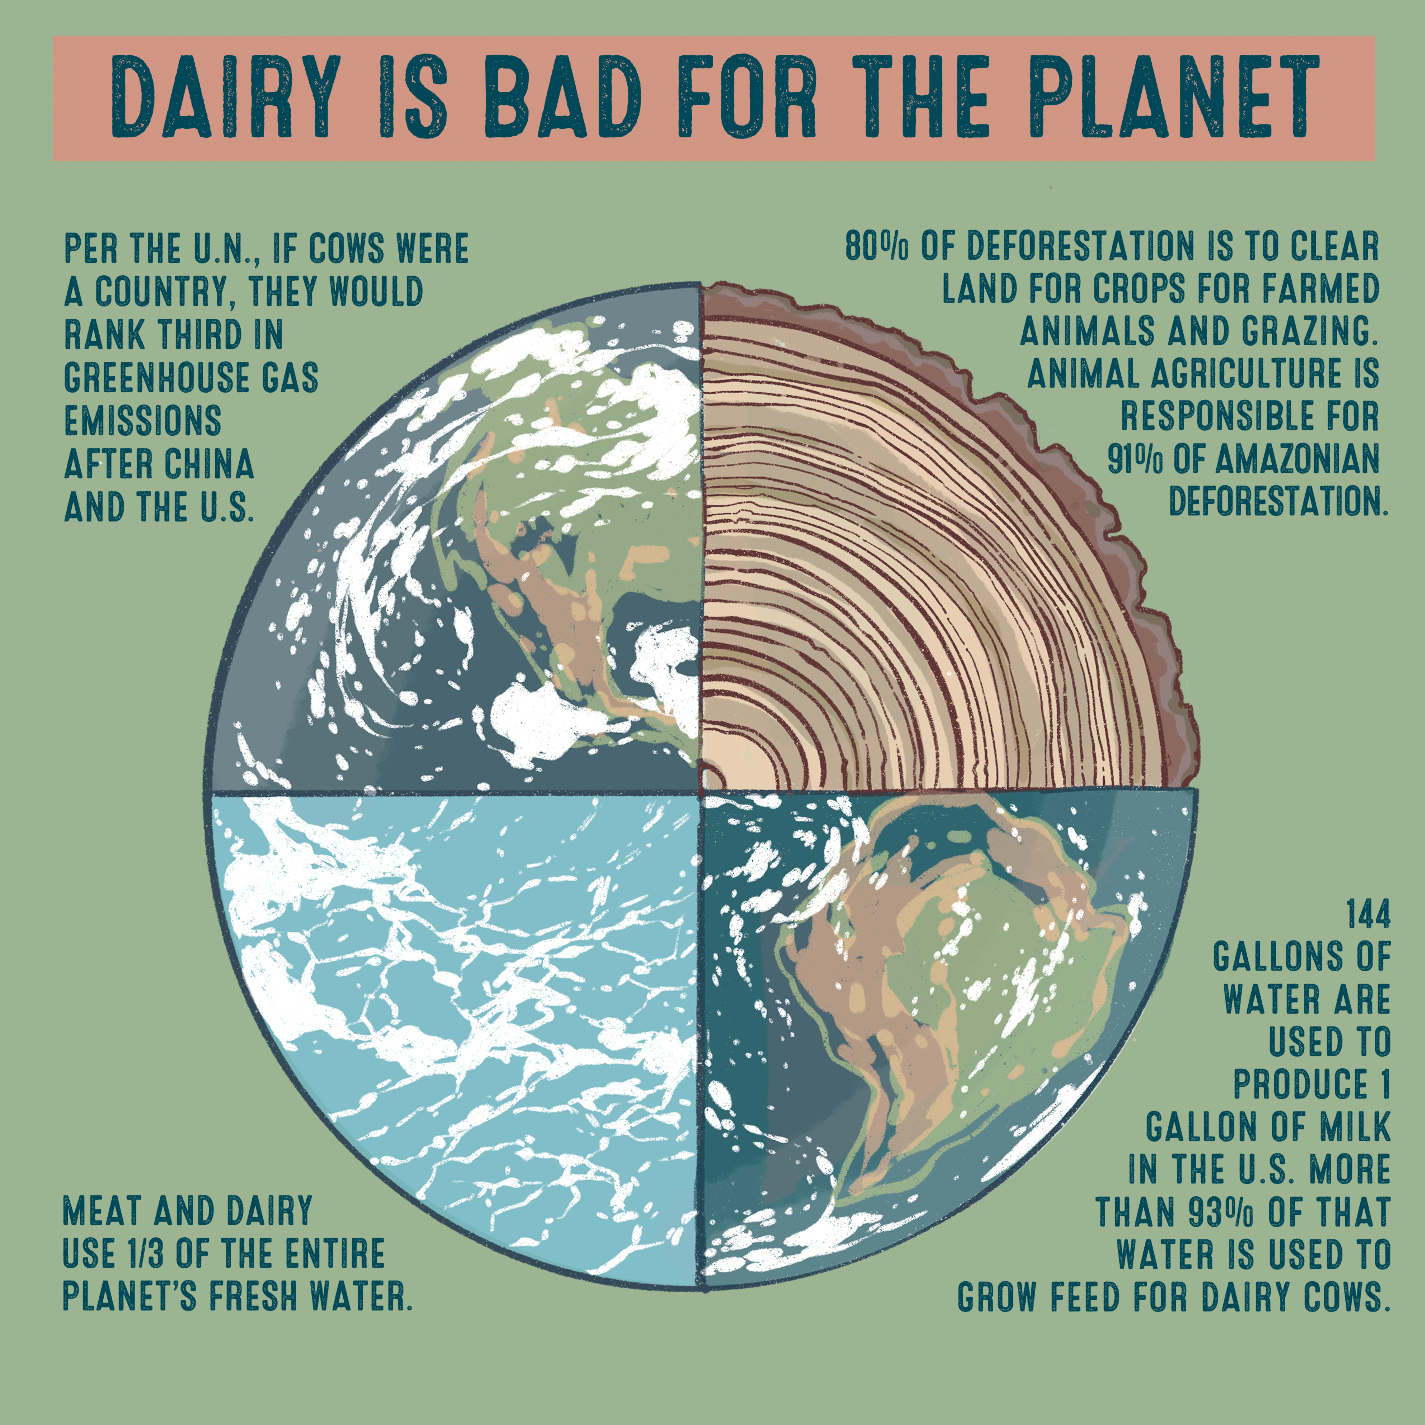 Dairy is bad for the planet  Per the U.N., if cows were a country, they would rank third in greenhouse gas emissions after China and the U.S. 80% of land deforestation is to clear land for crops for farmed animals and grazing. Animal agriculture is responsible for 91% of Amazonian deforestation.  Meat and dairy use 1/3 of the entire planet’s fresh water. 144 gallons of water is used to produce 1 gallon of milk in the U.S. more than 93% of that water is used to grow feed for dairy cow